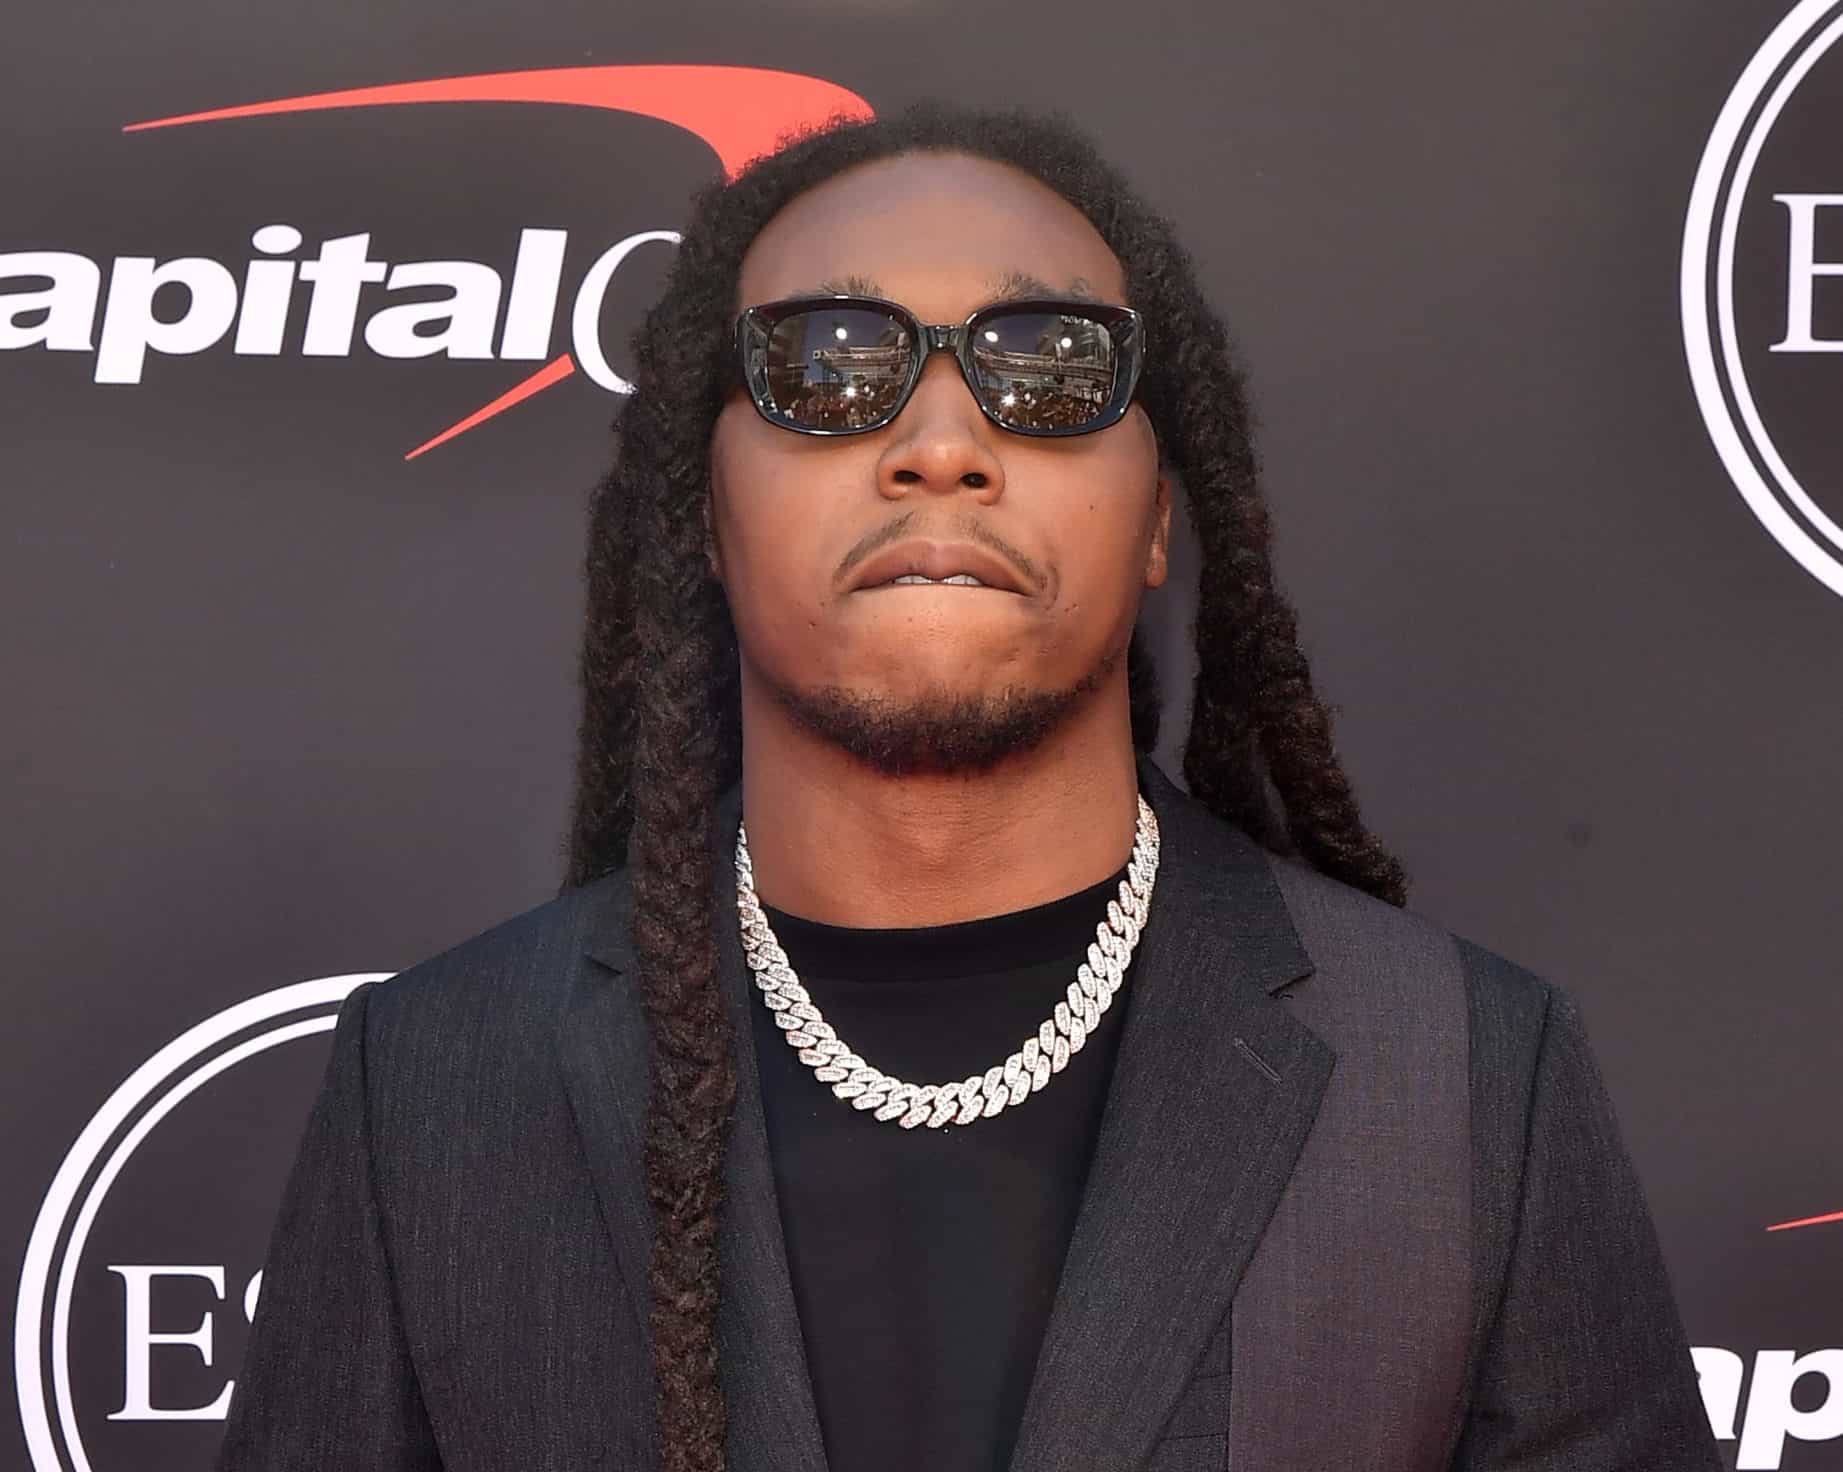 An anonymous woman is claiming Migos rapper Takeoff allegedly raped her at a party in Los Angeles. She is suing him.